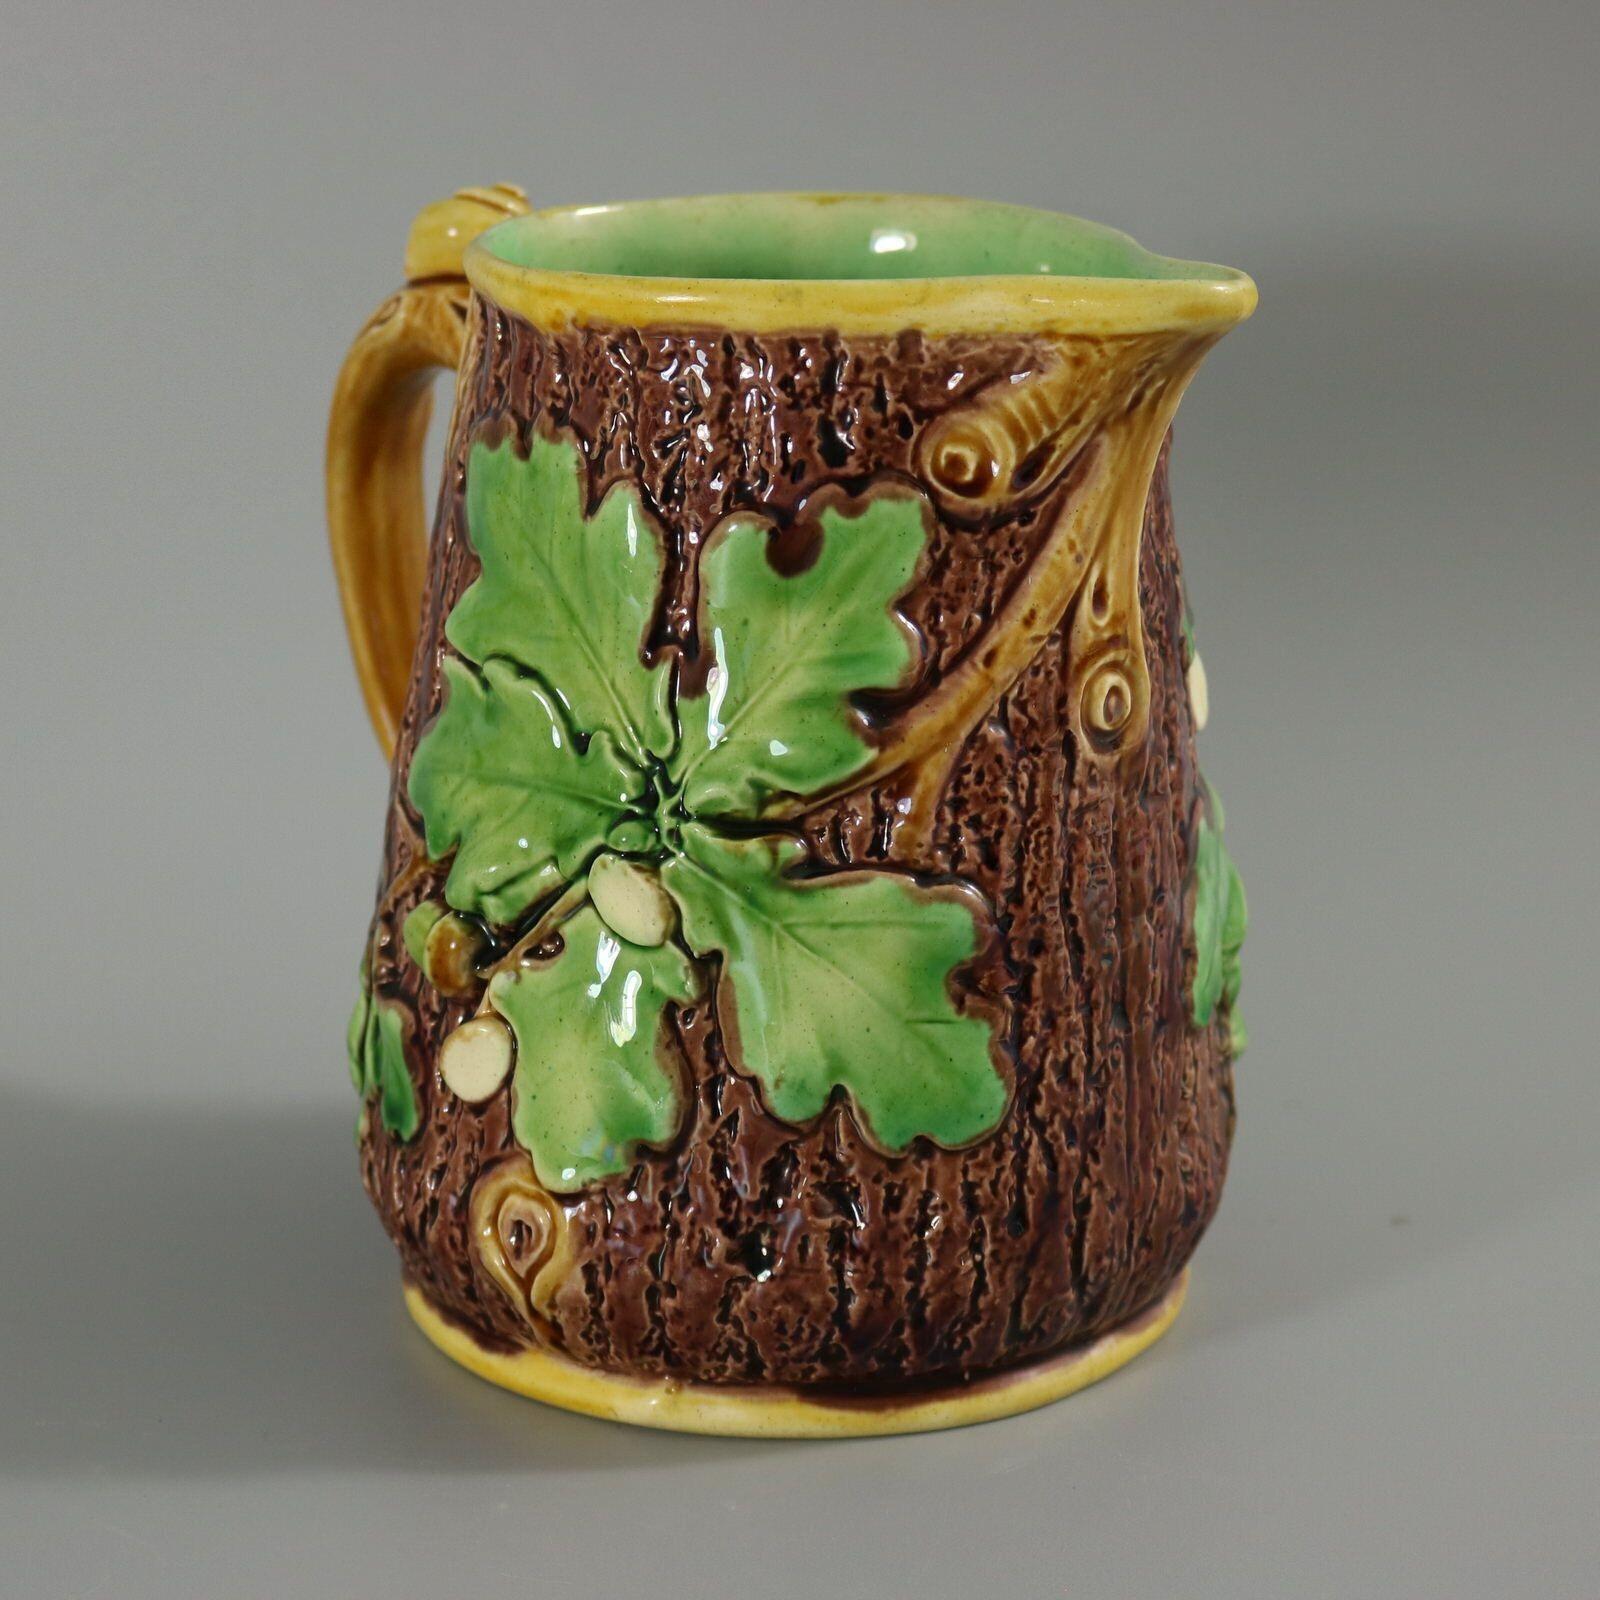 Minton Majolica Oak Jug / Pitcher with Snail Handle In Good Condition For Sale In Chelmsford, Essex